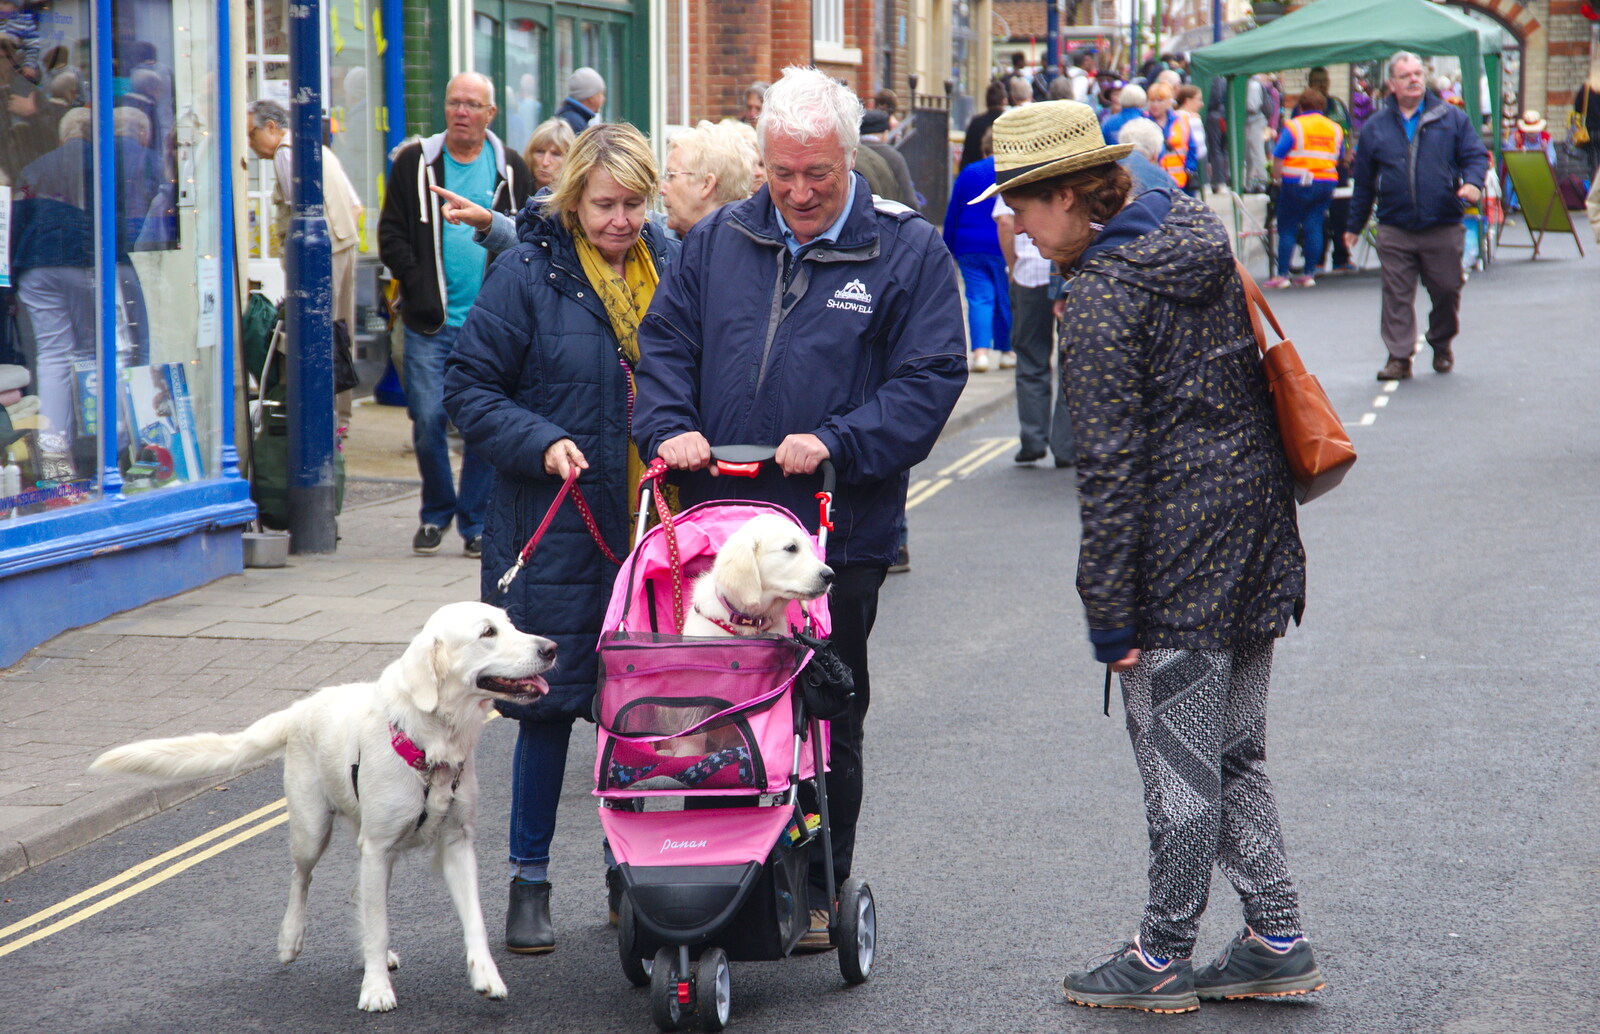 There's a puppy in a pram from Kelling Camping and the Potty Morris Festival, Sheringham, North Norfolk - 6th July 2019